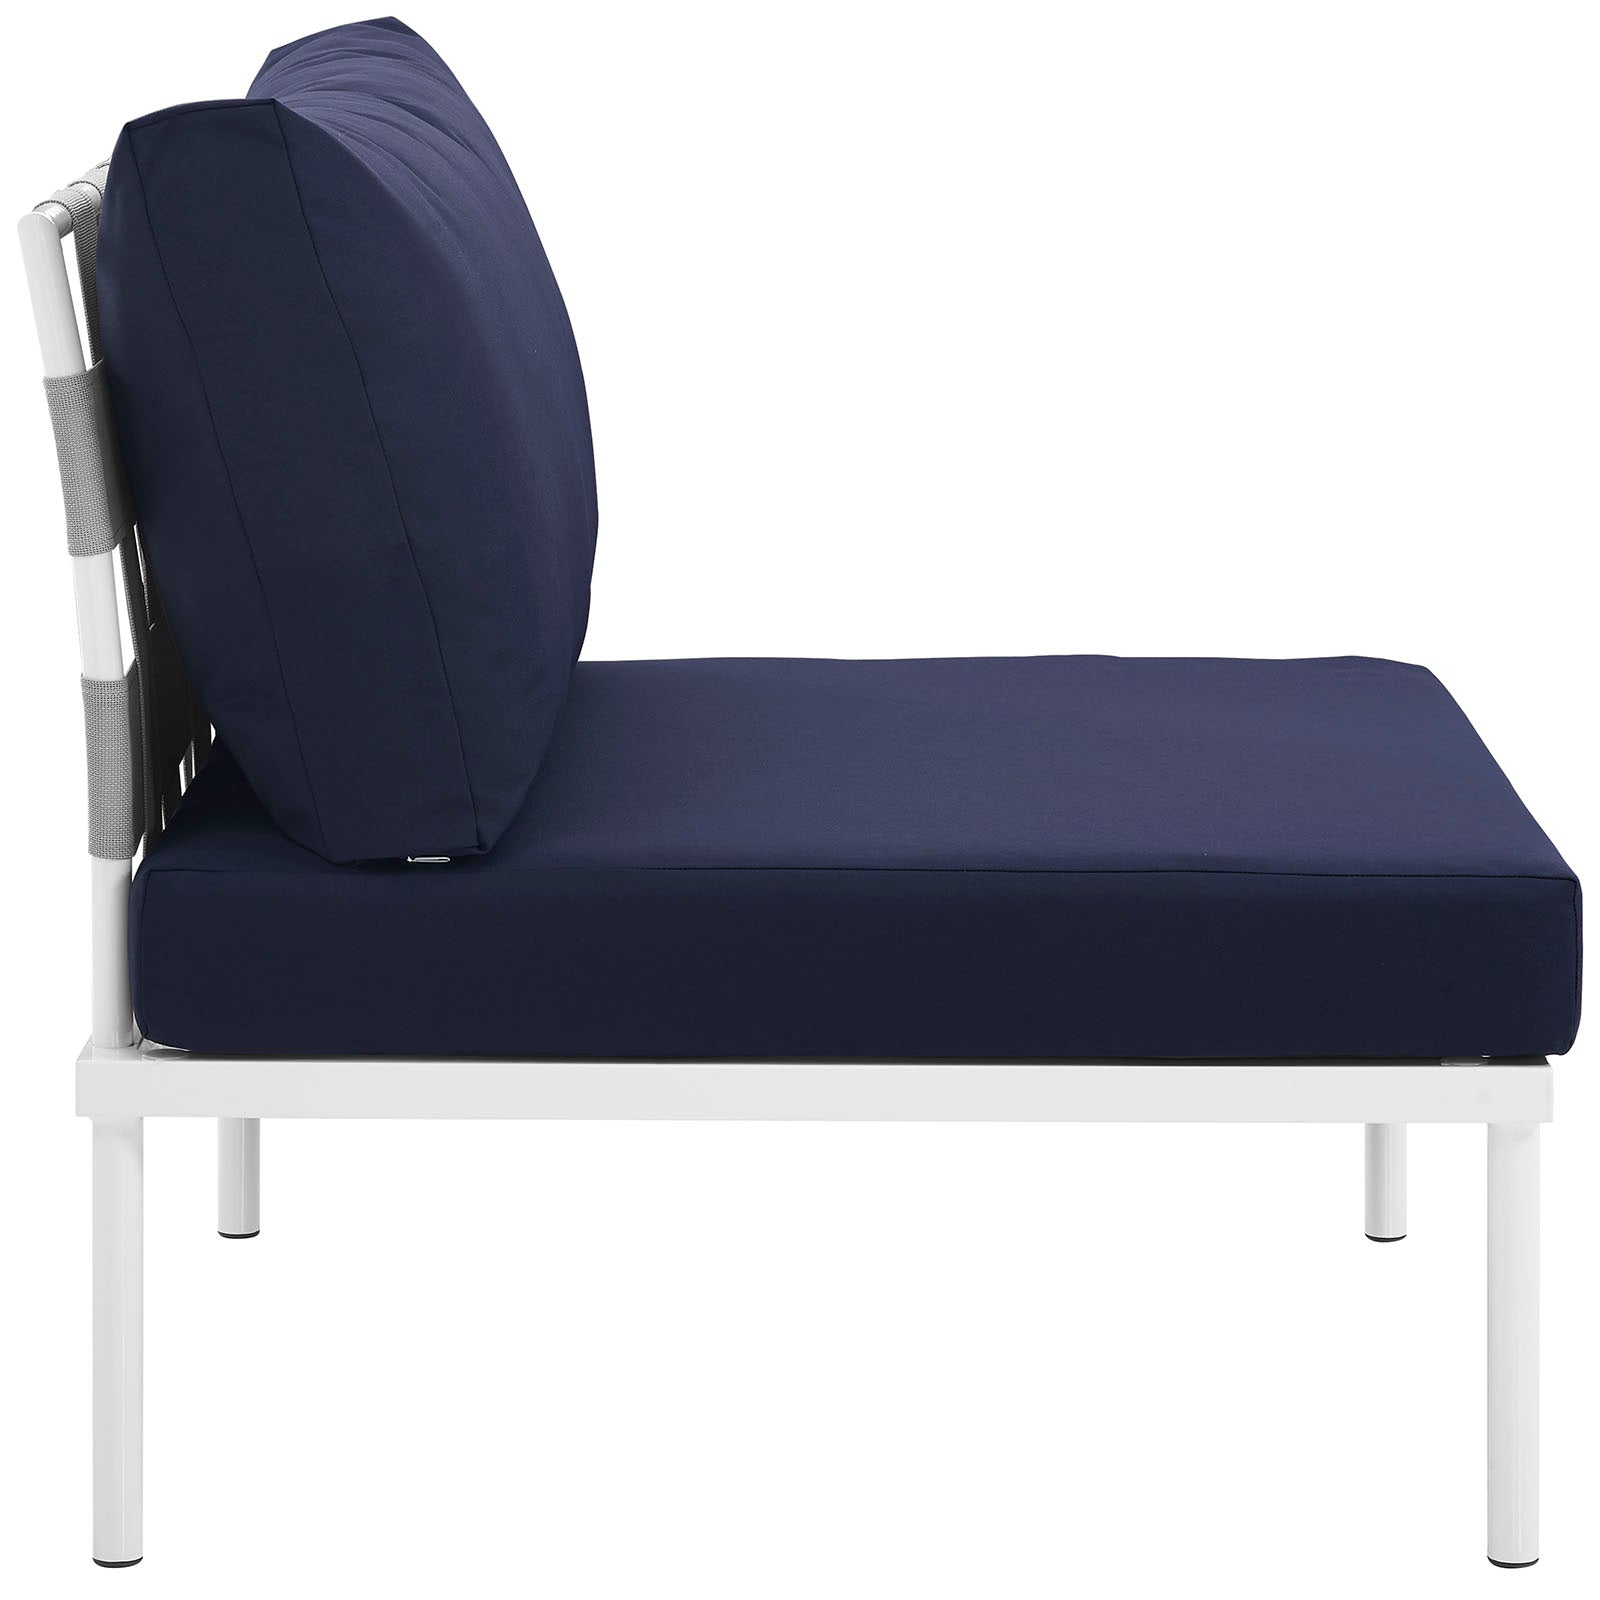 Modway Outdoor Chairs - Harmony Armless Outdoor Chair White & Navy